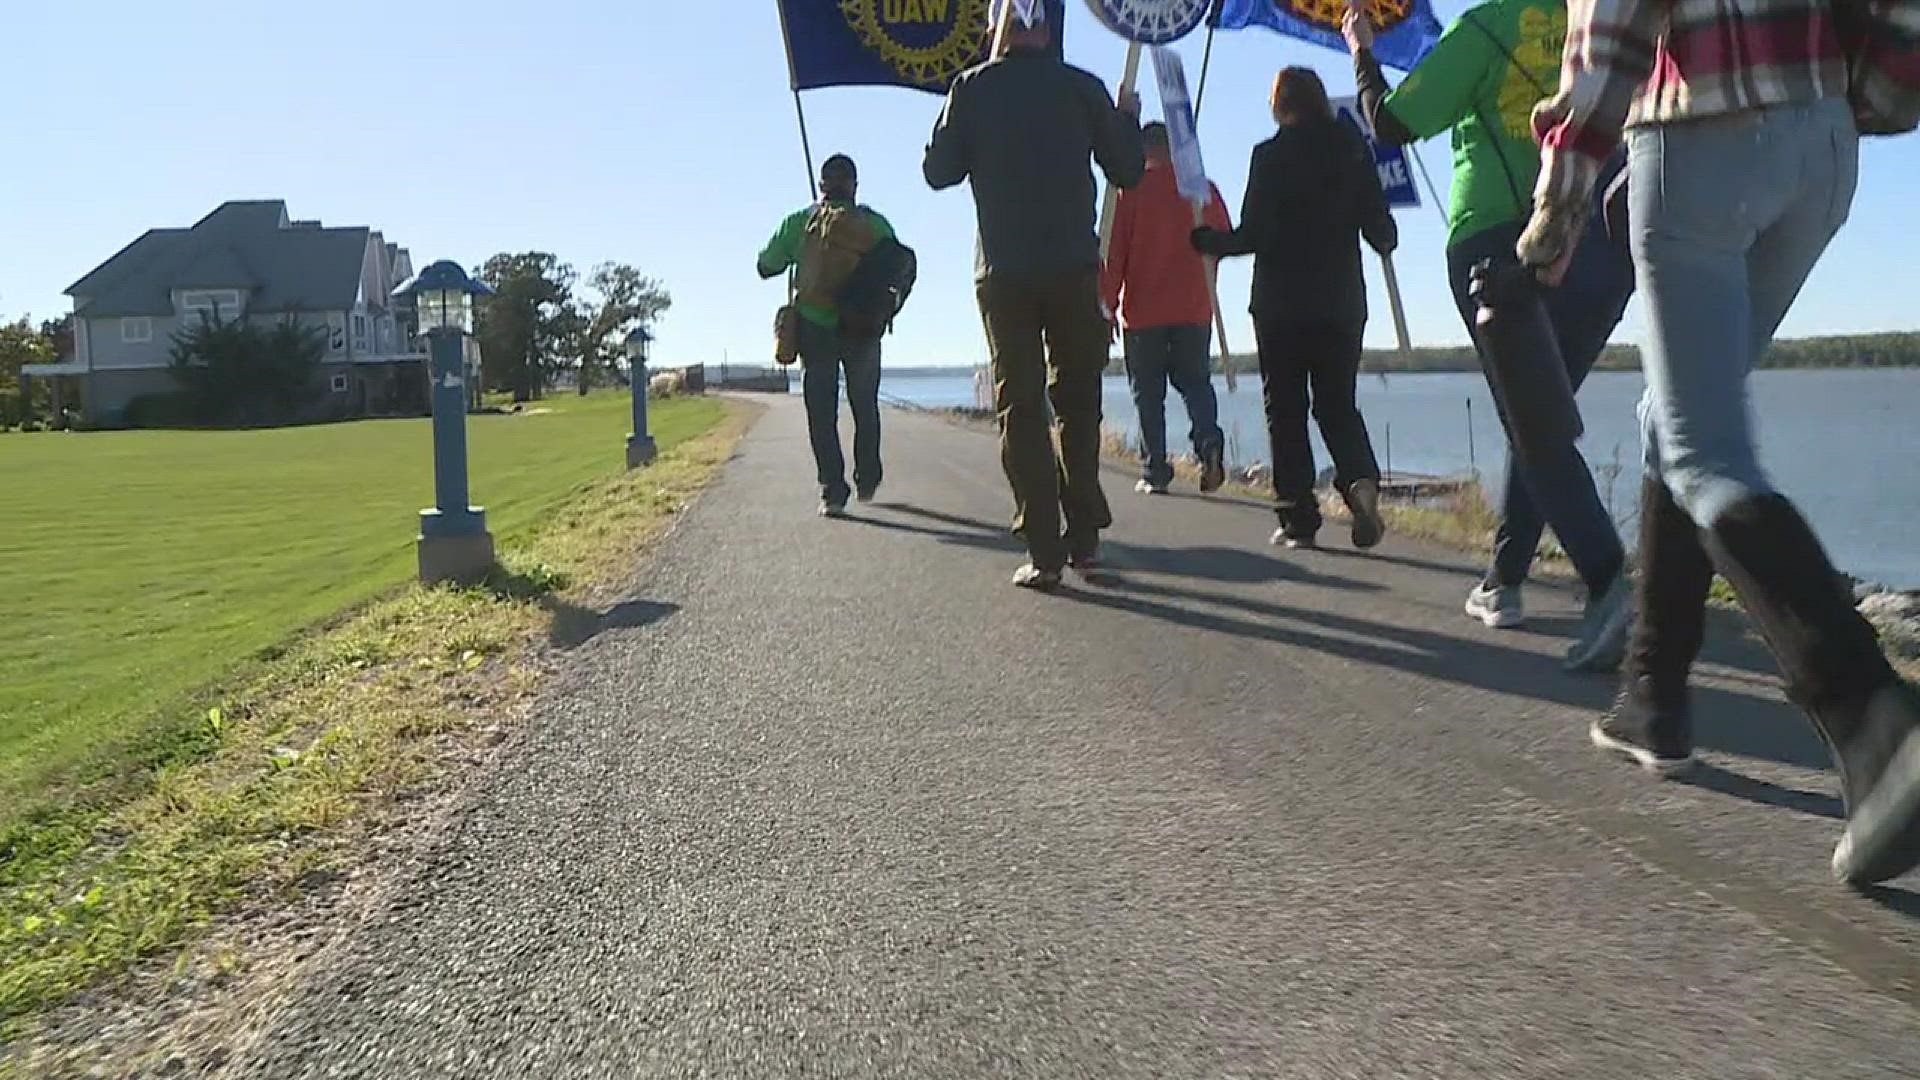 Almost 200 UAW employees and supporters walked along the Mississippi River in solidarity with John Deere strikers.